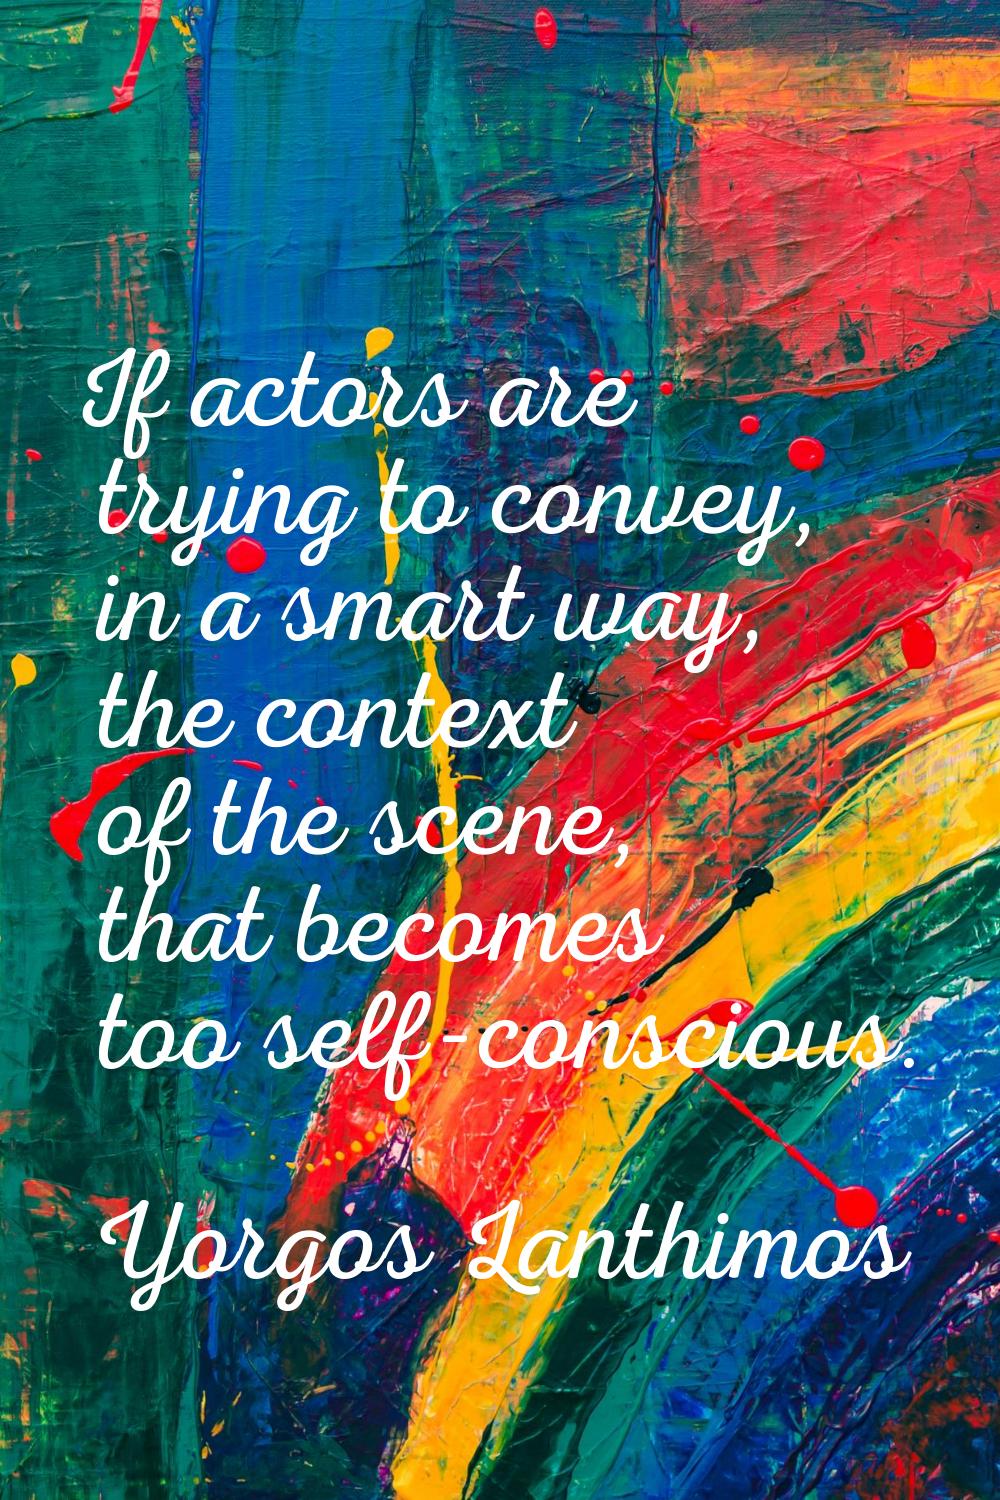 If actors are trying to convey, in a smart way, the context of the scene, that becomes too self-con